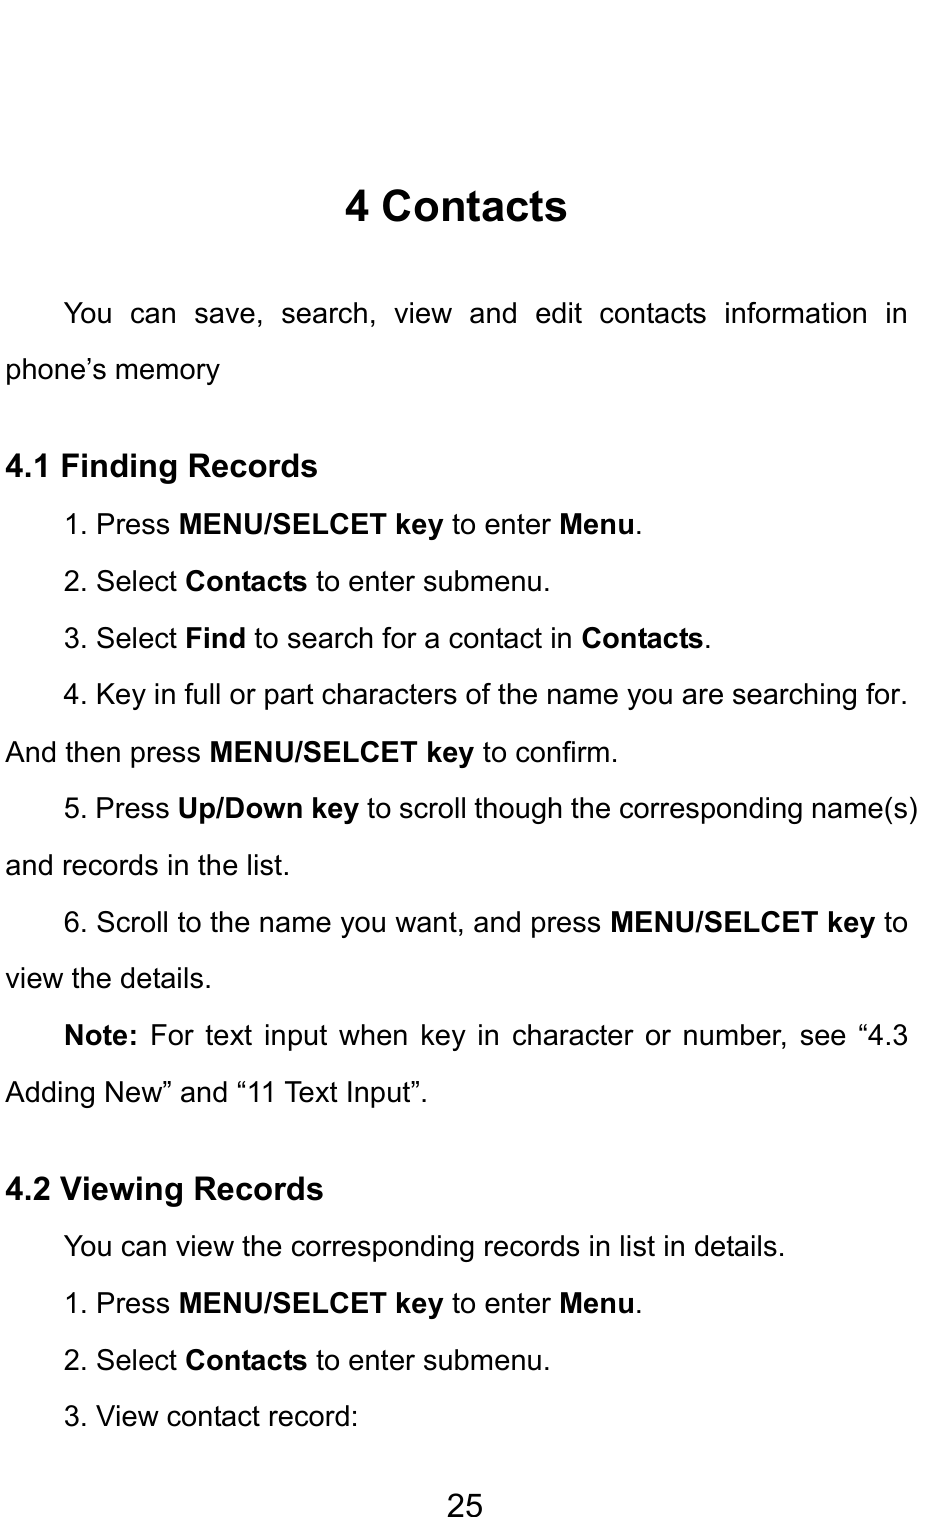                                     25 4 Contacts You can save, search, view and edit contacts information in phone’s memory   4.1 Finding Records 1. Press MENU/SELCET key to enter Menu. 2. Select Contacts to enter submenu.   3. Select Find to search for a contact in Contacts. 4. Key in full or part characters of the name you are searching for. And then press MENU/SELCET key to confirm. 5. Press Up/Down key to scroll though the corresponding name(s) and records in the list.   6. Scroll to the name you want, and press MENU/SELCET key to view the details. Note: For text input when key in character or number, see “4.3 Adding New” and “11 Text Input”. 4.2 Viewing Records   You can view the corresponding records in list in details. 1. Press MENU/SELCET key to enter Menu. 2. Select Contacts to enter submenu.   3. View contact record:   